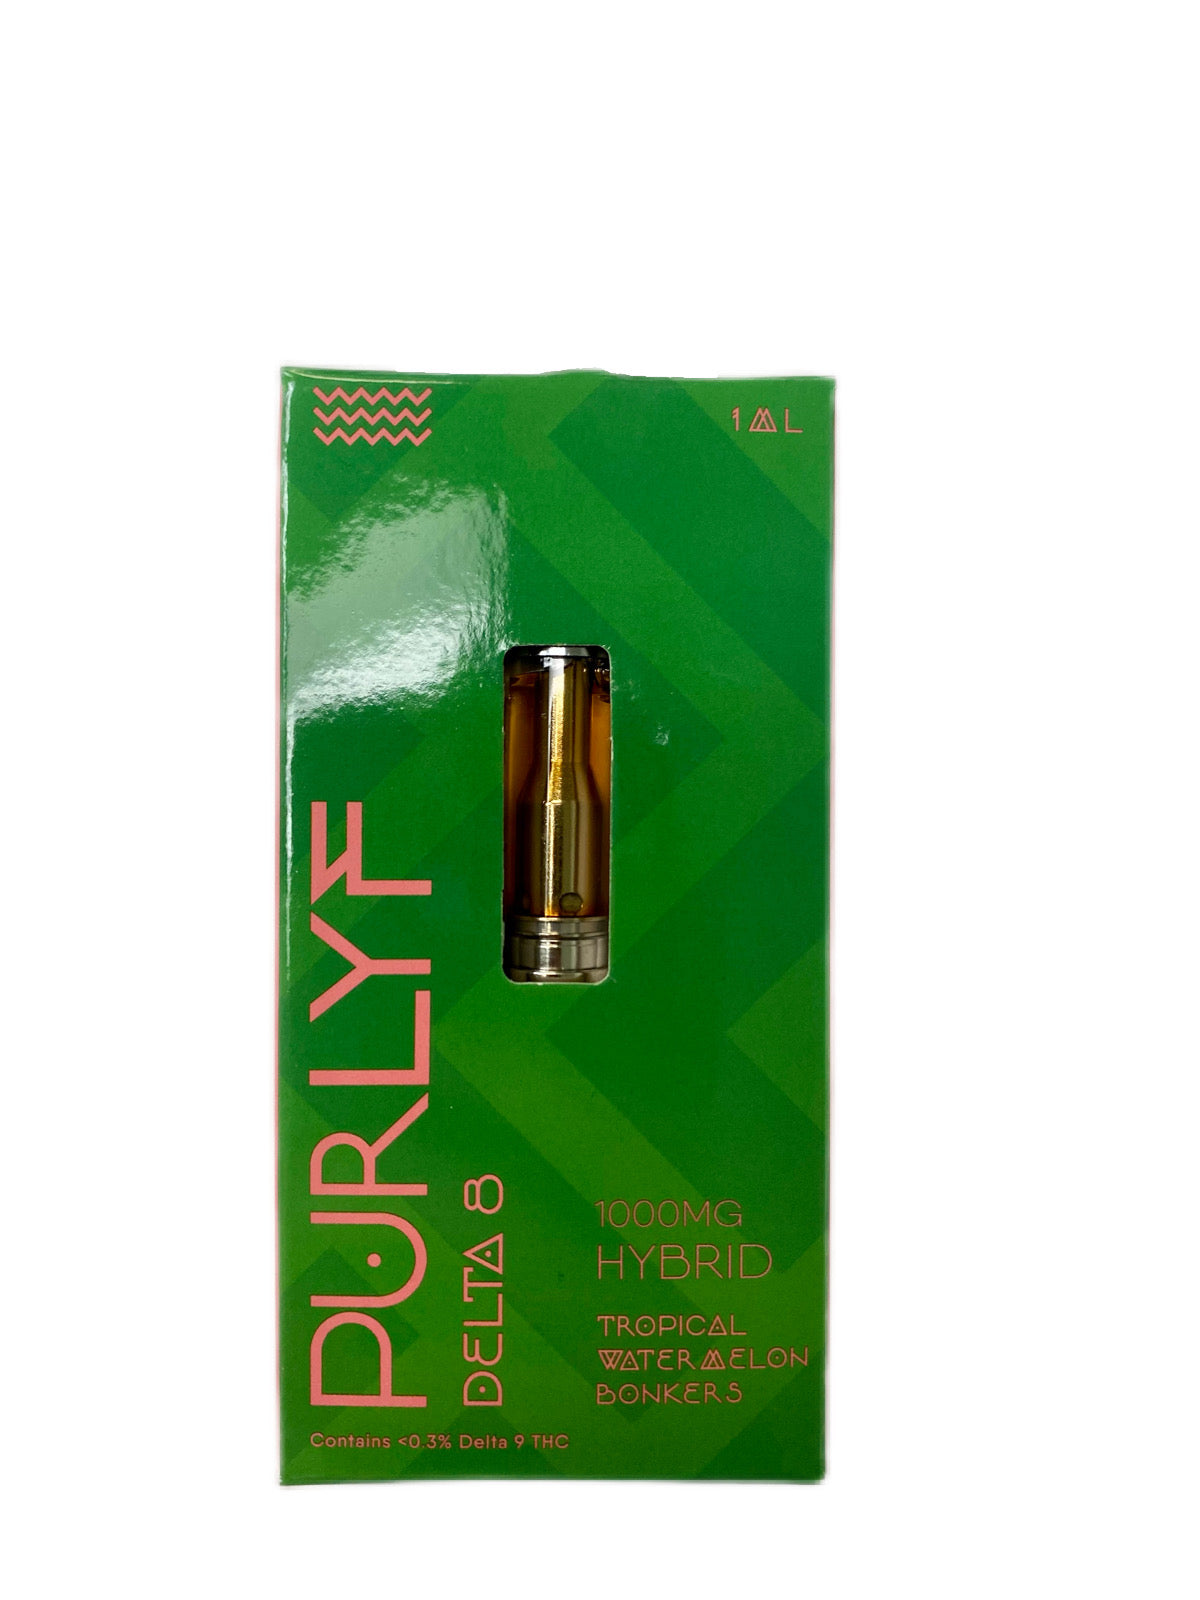 Purlyf Delta 8 THC Vape Cartridge, 510 threaded Cartridge, Group picture $14.99 available in Omaha, Nebraska or Online at Delta8emporium.co